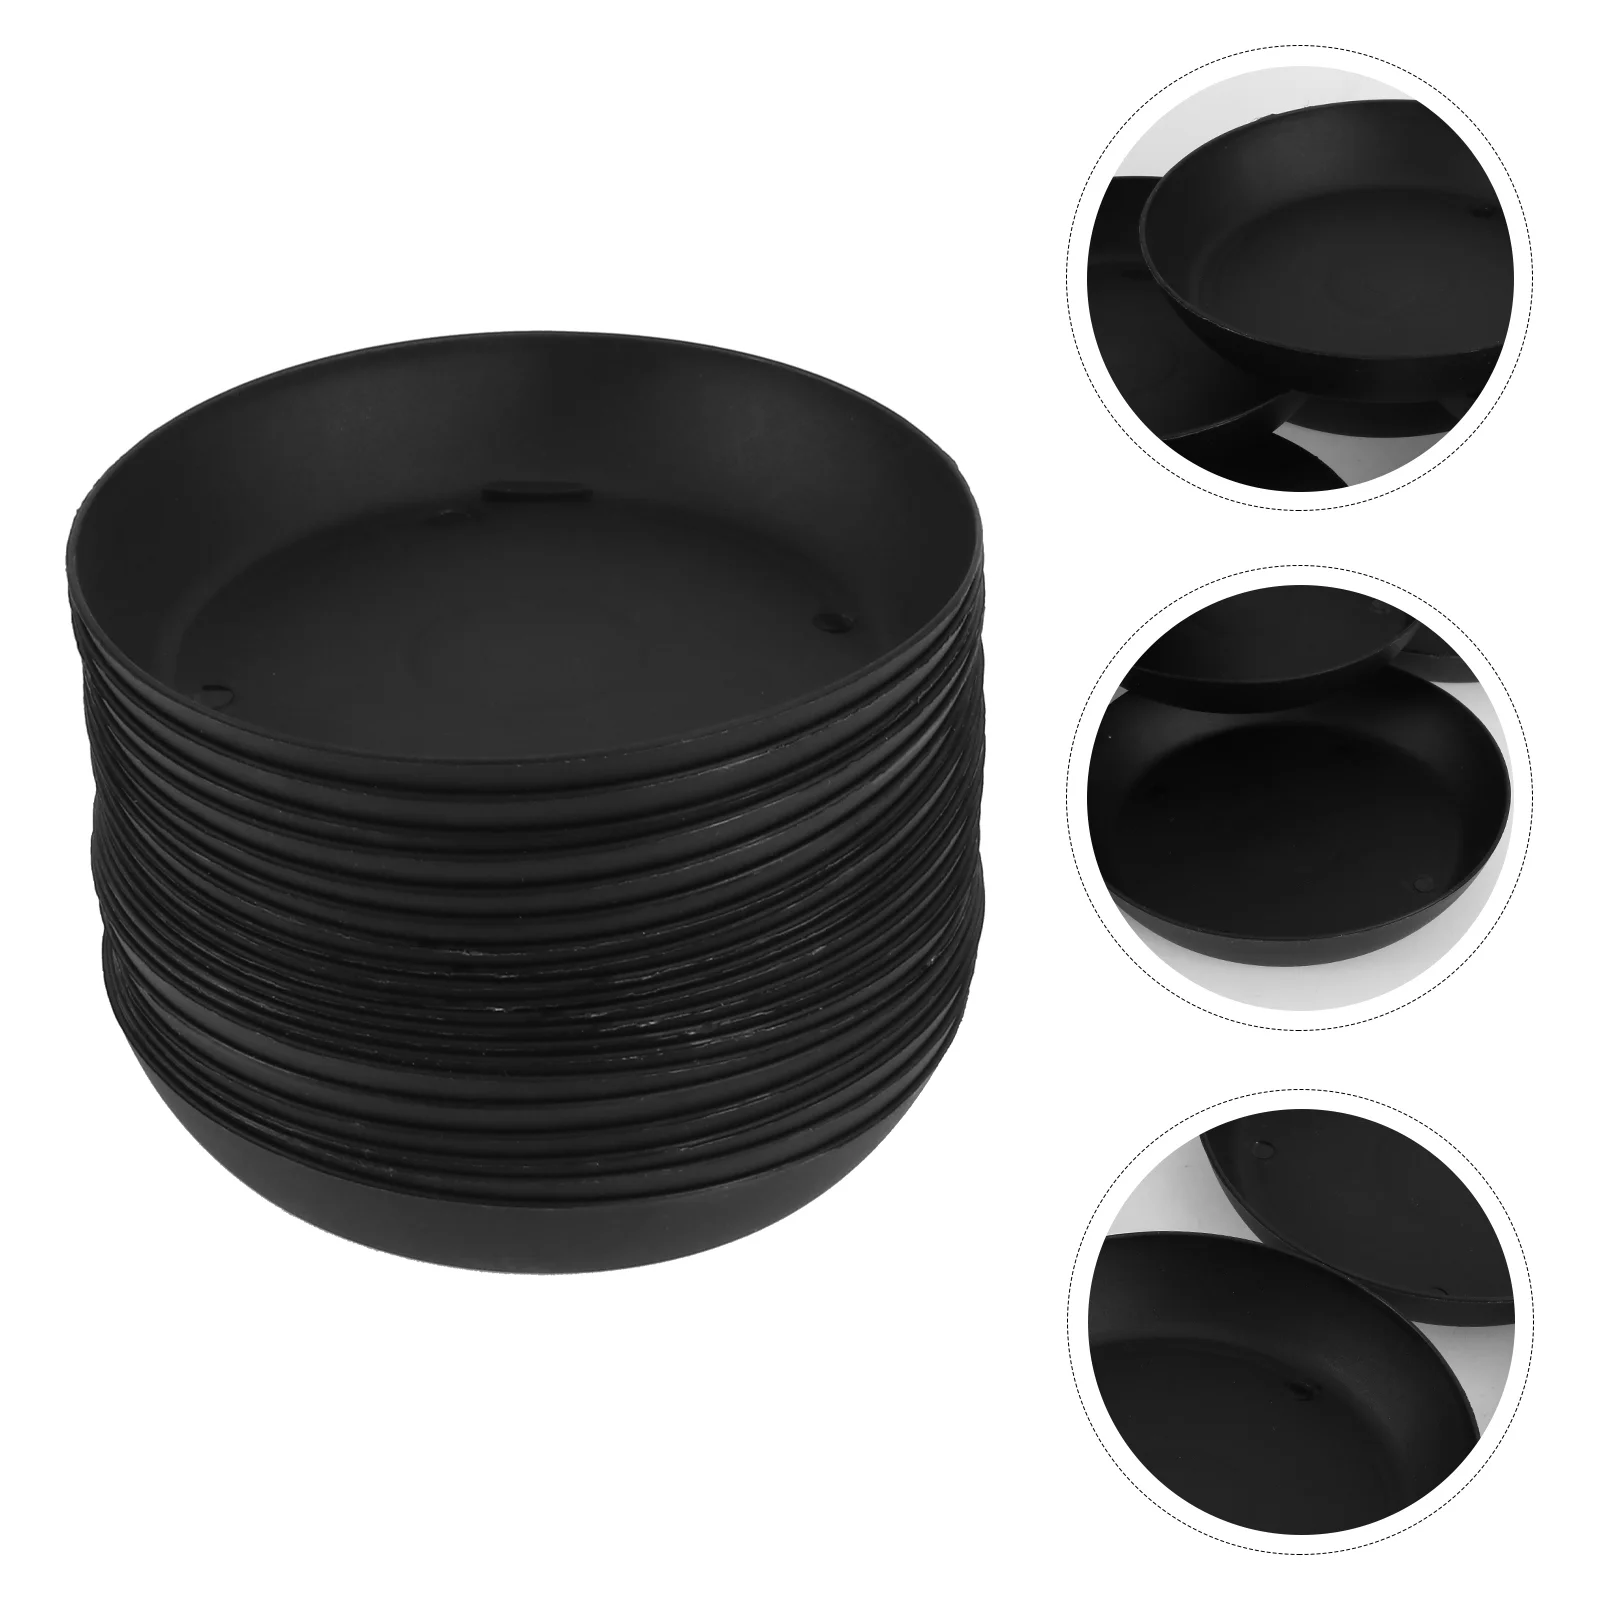 

20 Pcs Planter Drainage Saucer Potted Plants Flower Pots Tray Trays Greenhouse Black Container Terra Base Root Riot